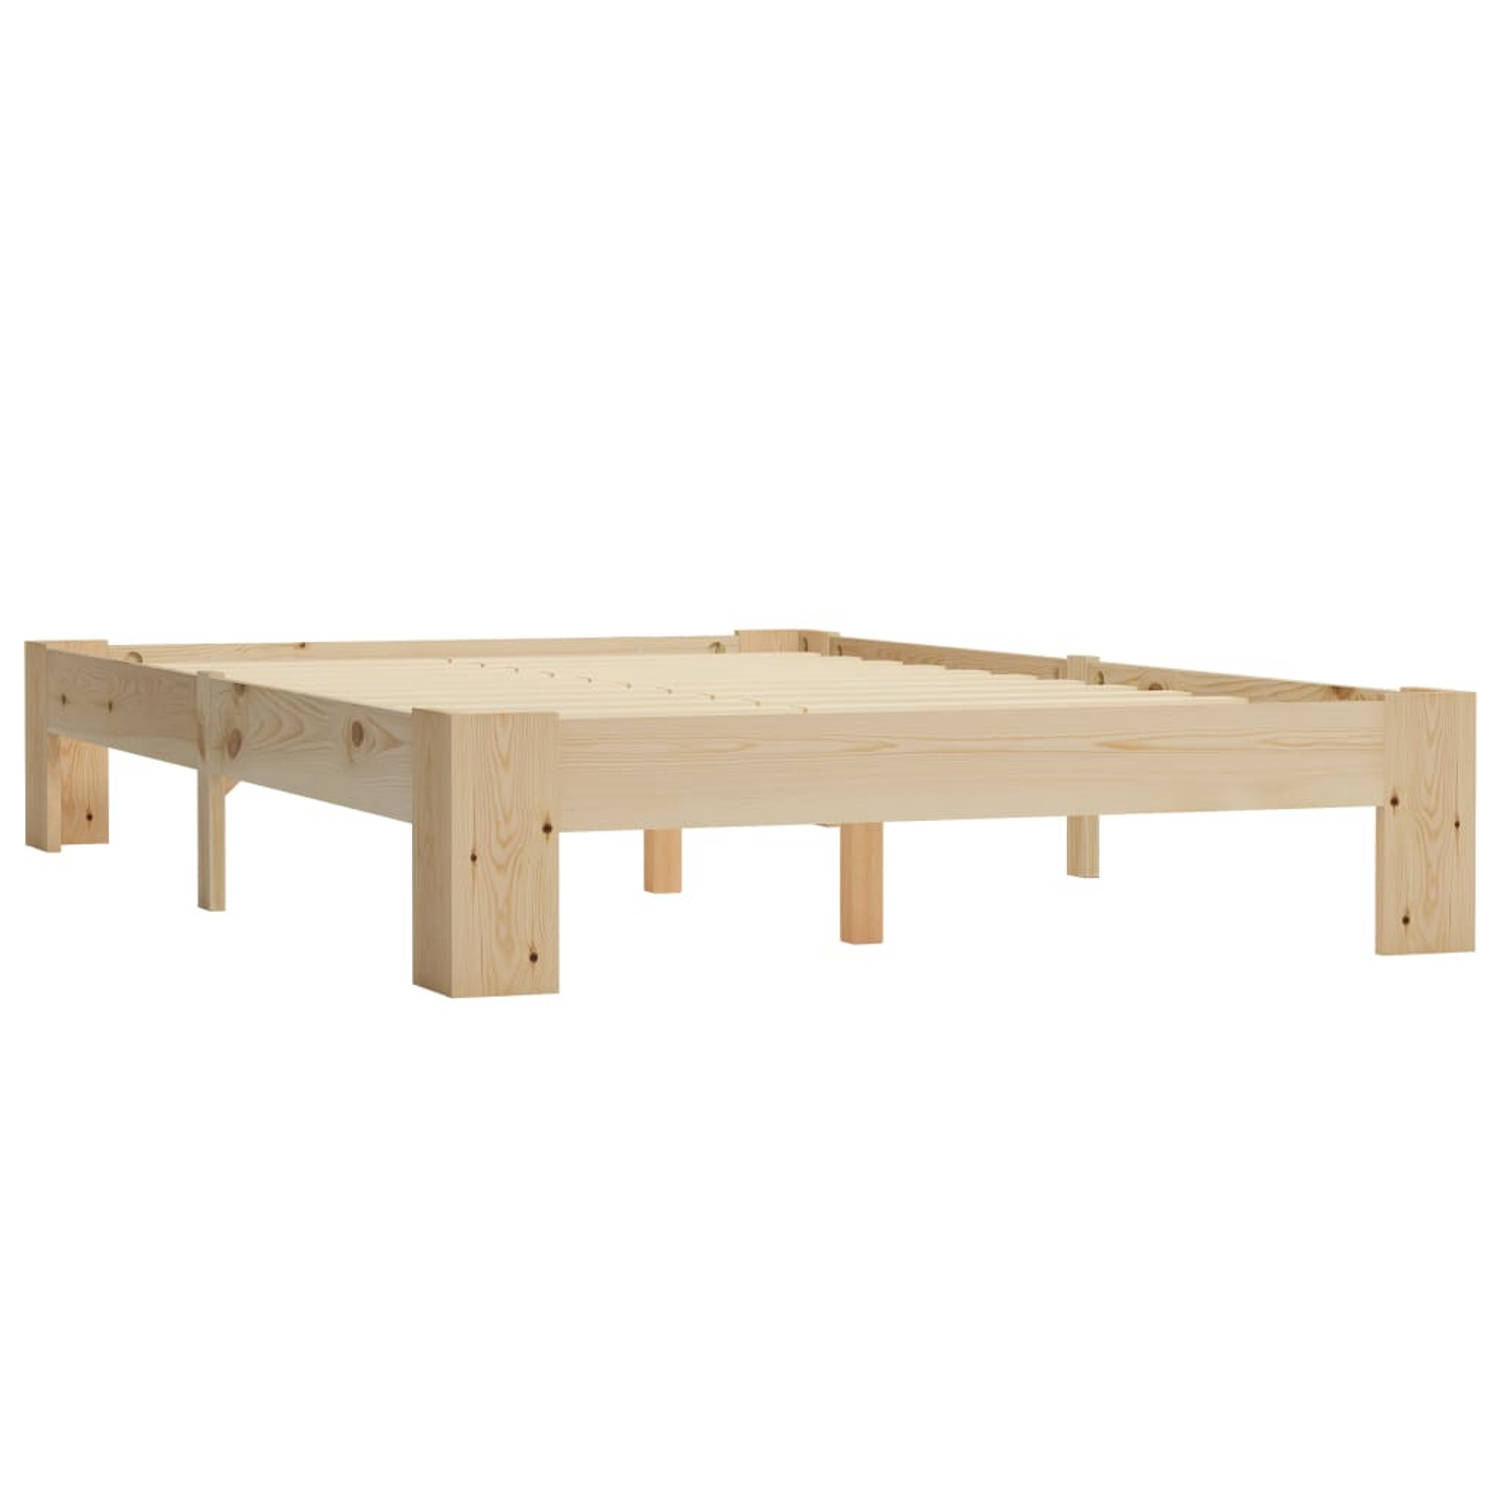 The Living Store Bedframe massief grenenhout 120x200 cm - Bed